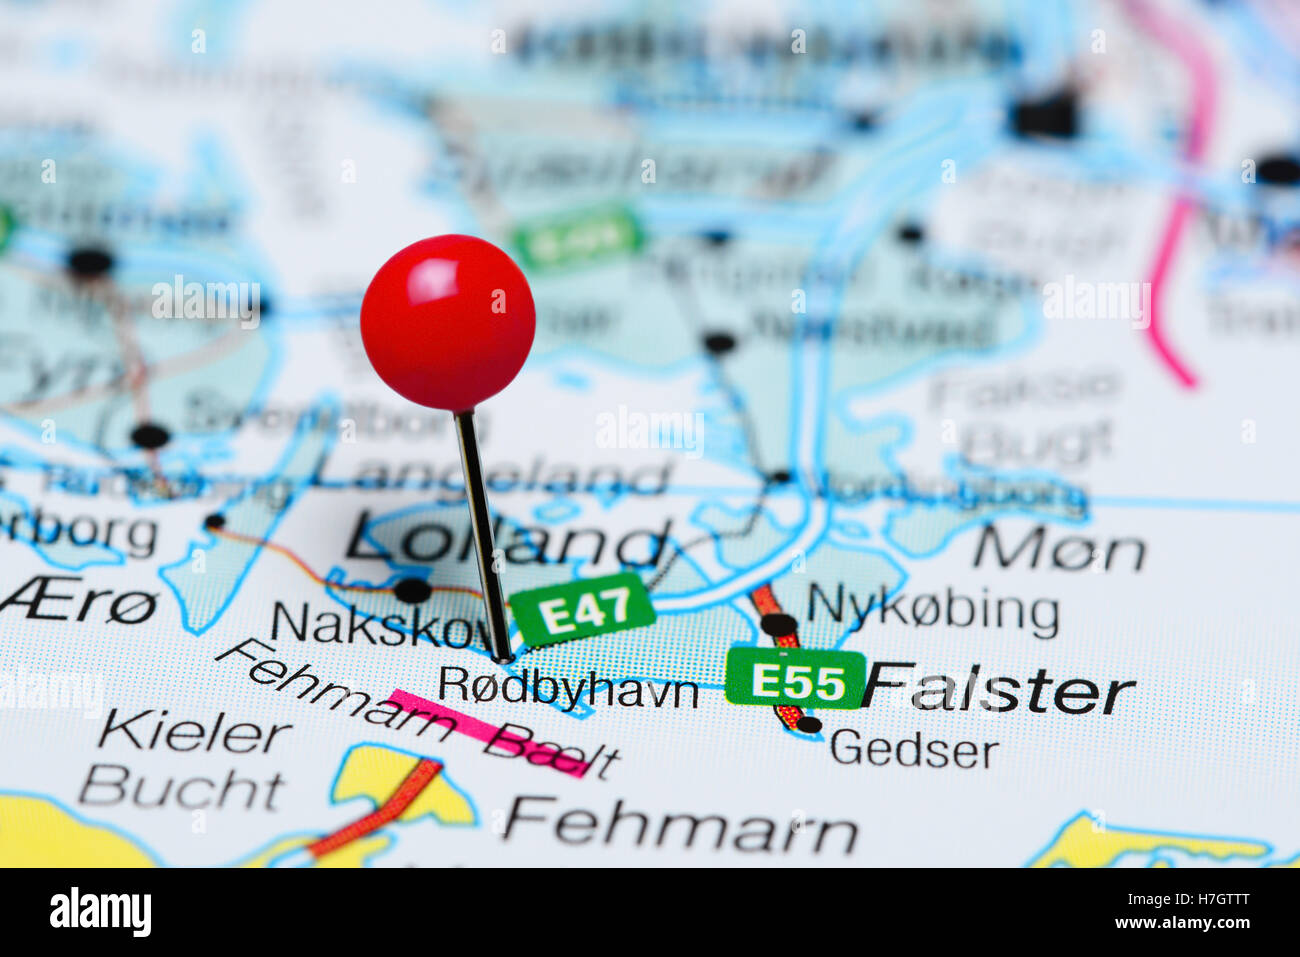 Rodbyhavn pinned on a map of Denmark Stock Photo